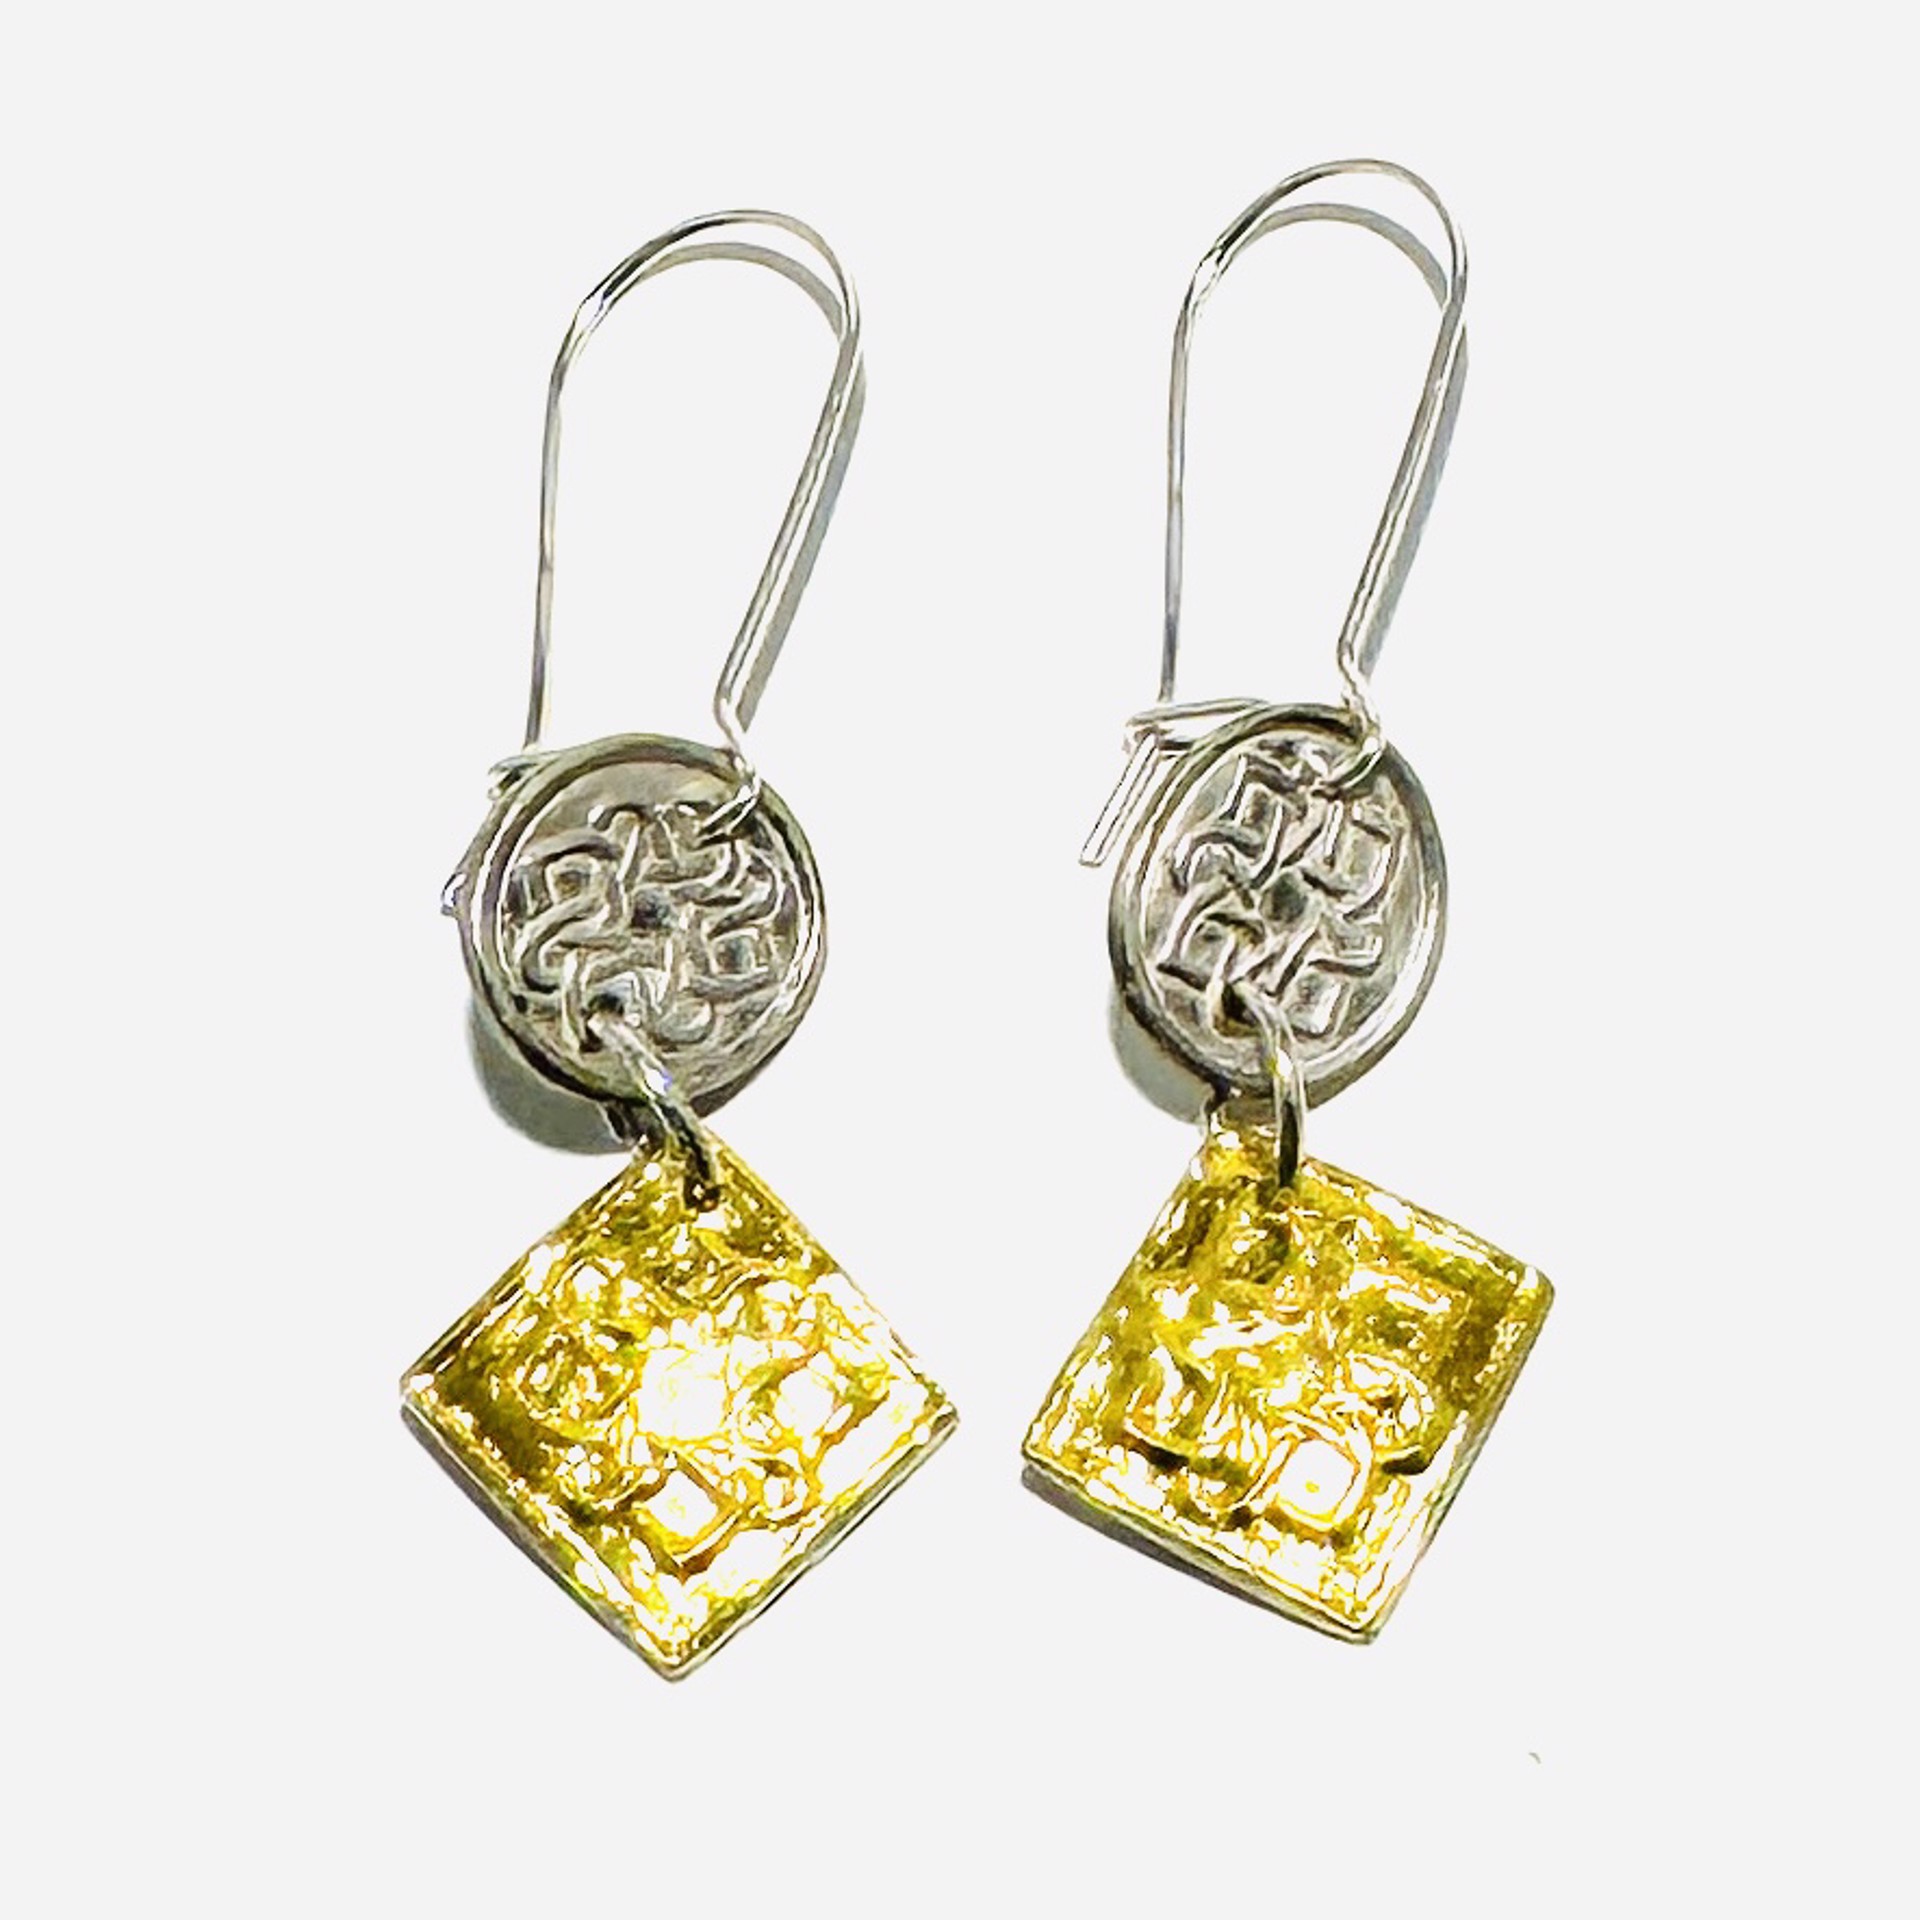 Keum-boo Fine Silver and Gold Circle and Square Earrings KH23-20 by Karen Hakim